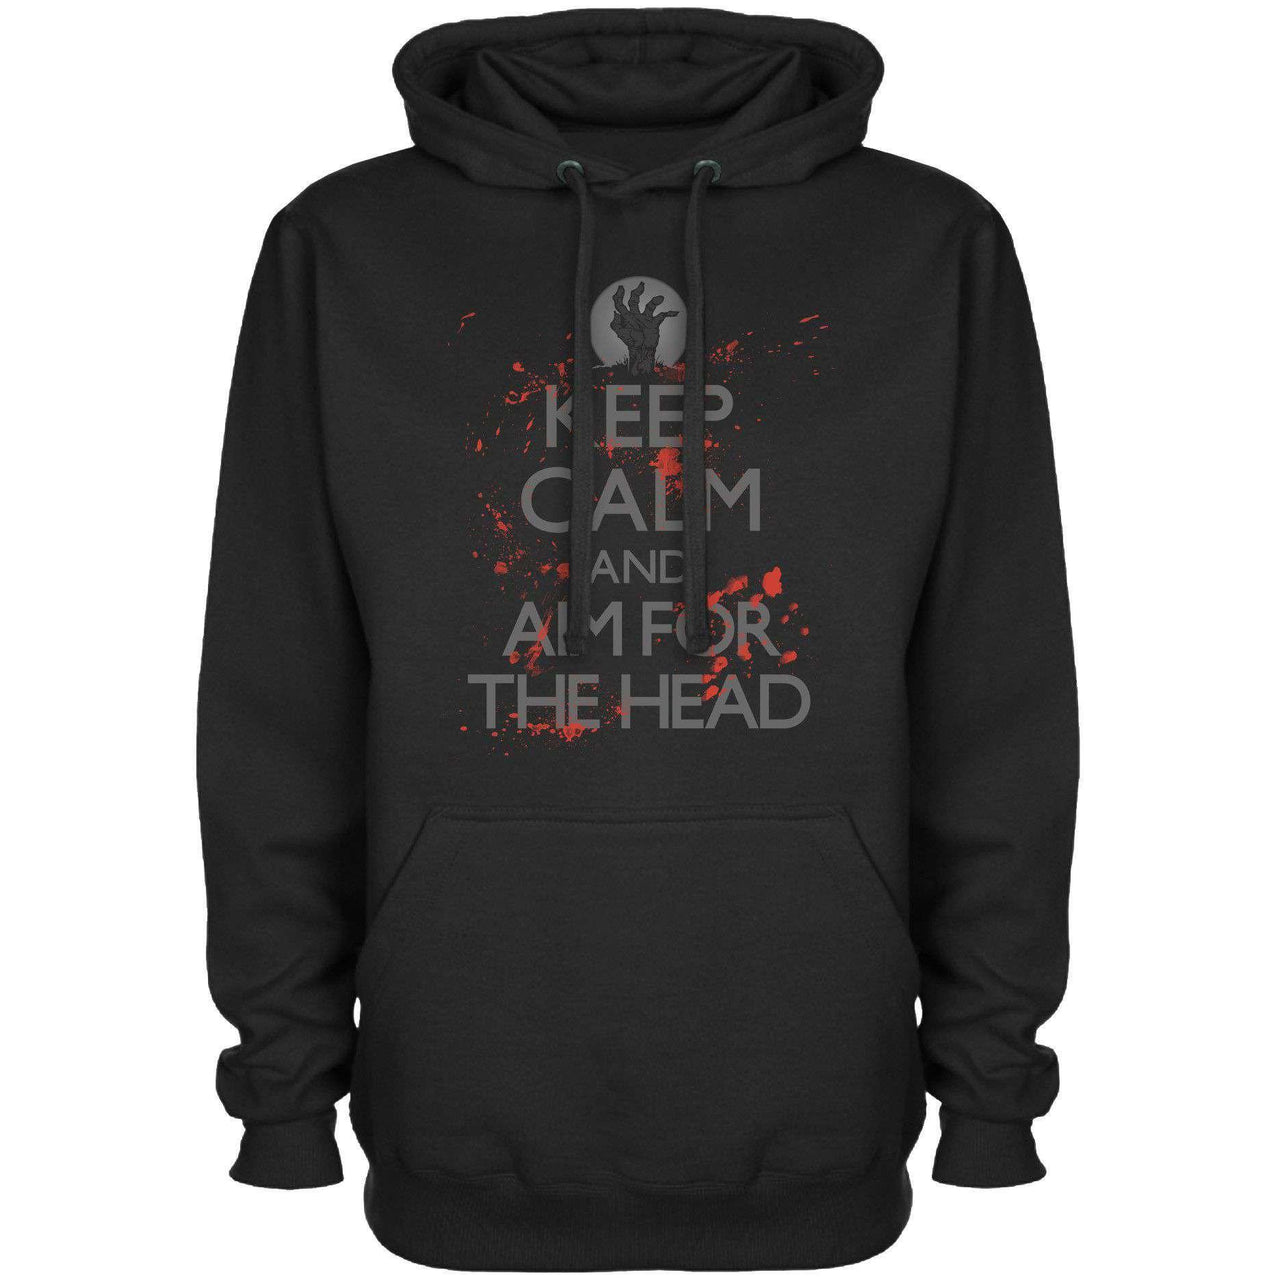 Funny Keep Calm And Aim For The Head Hoodie For Men and Women 8Ball